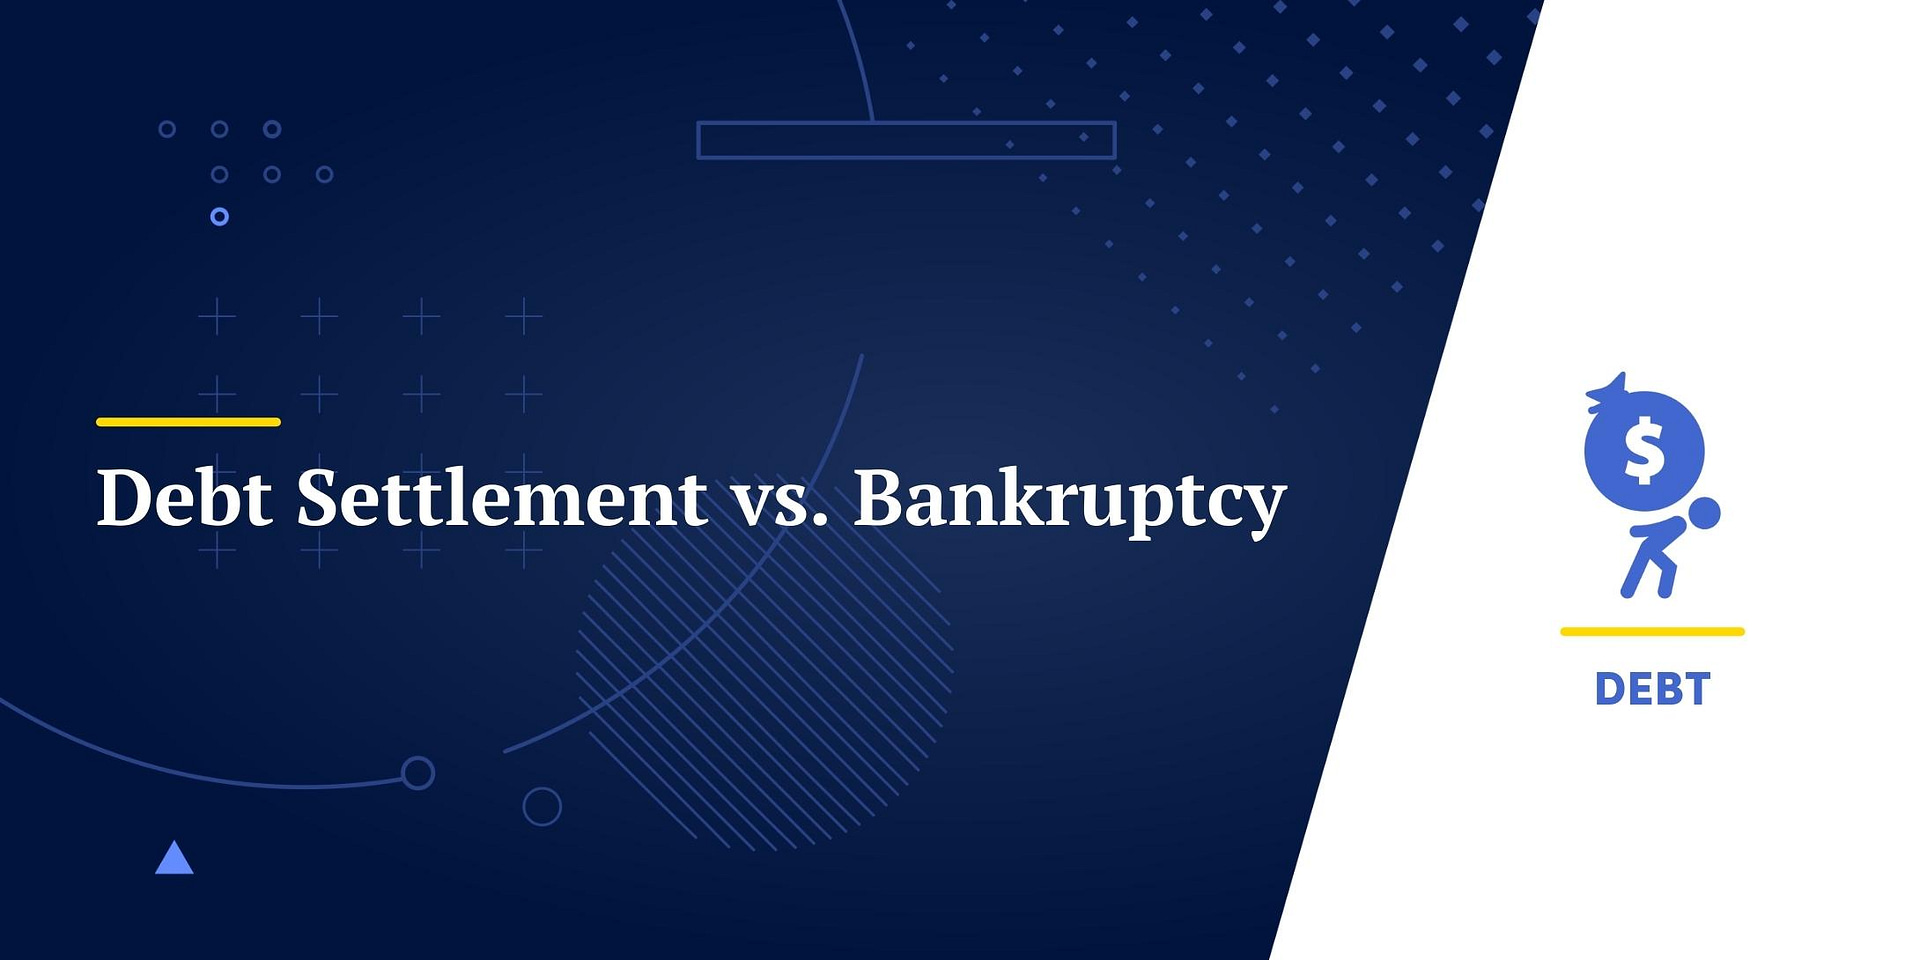 Bankruptcy Dismissal vs. Discharge: What's the Difference and How They  Affect Credit -Self.